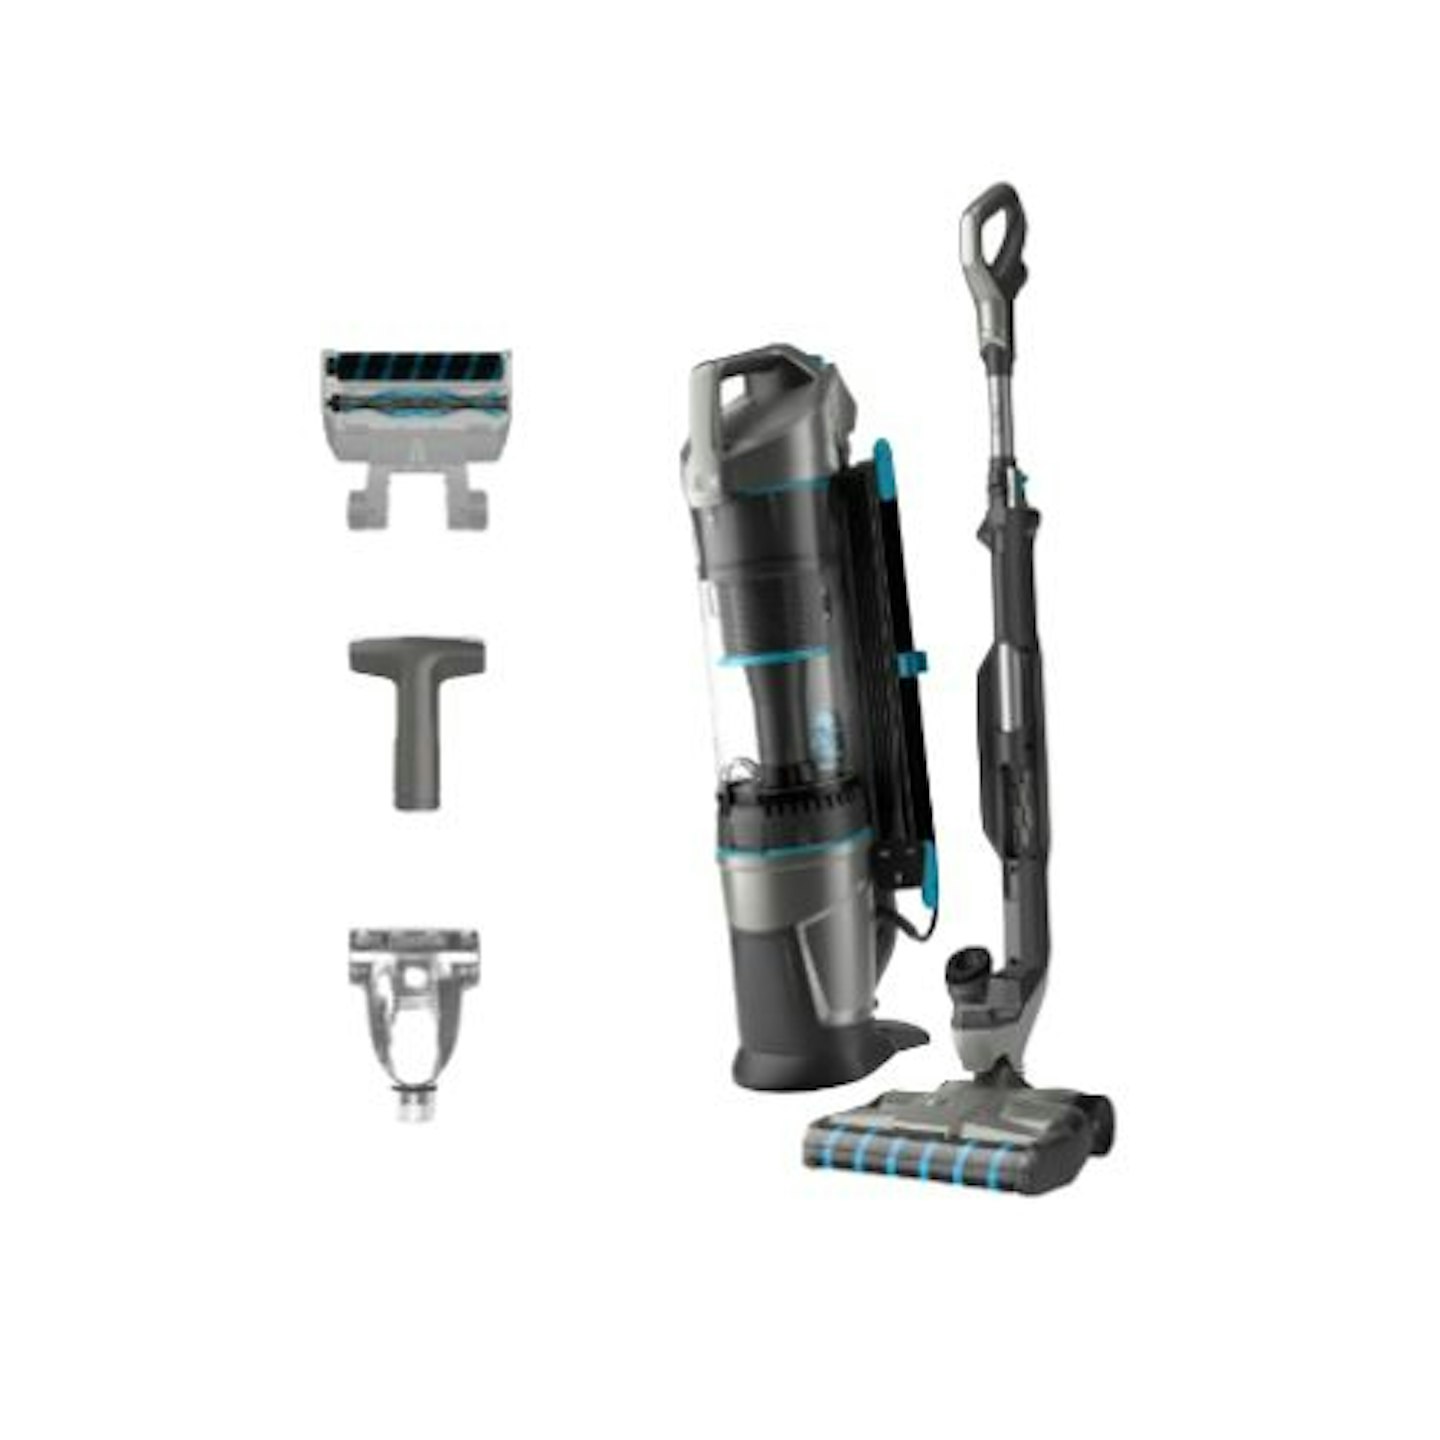 Vax Air Lift 2 Pet CDUP-PLXS Upright Vacuum Cleaner